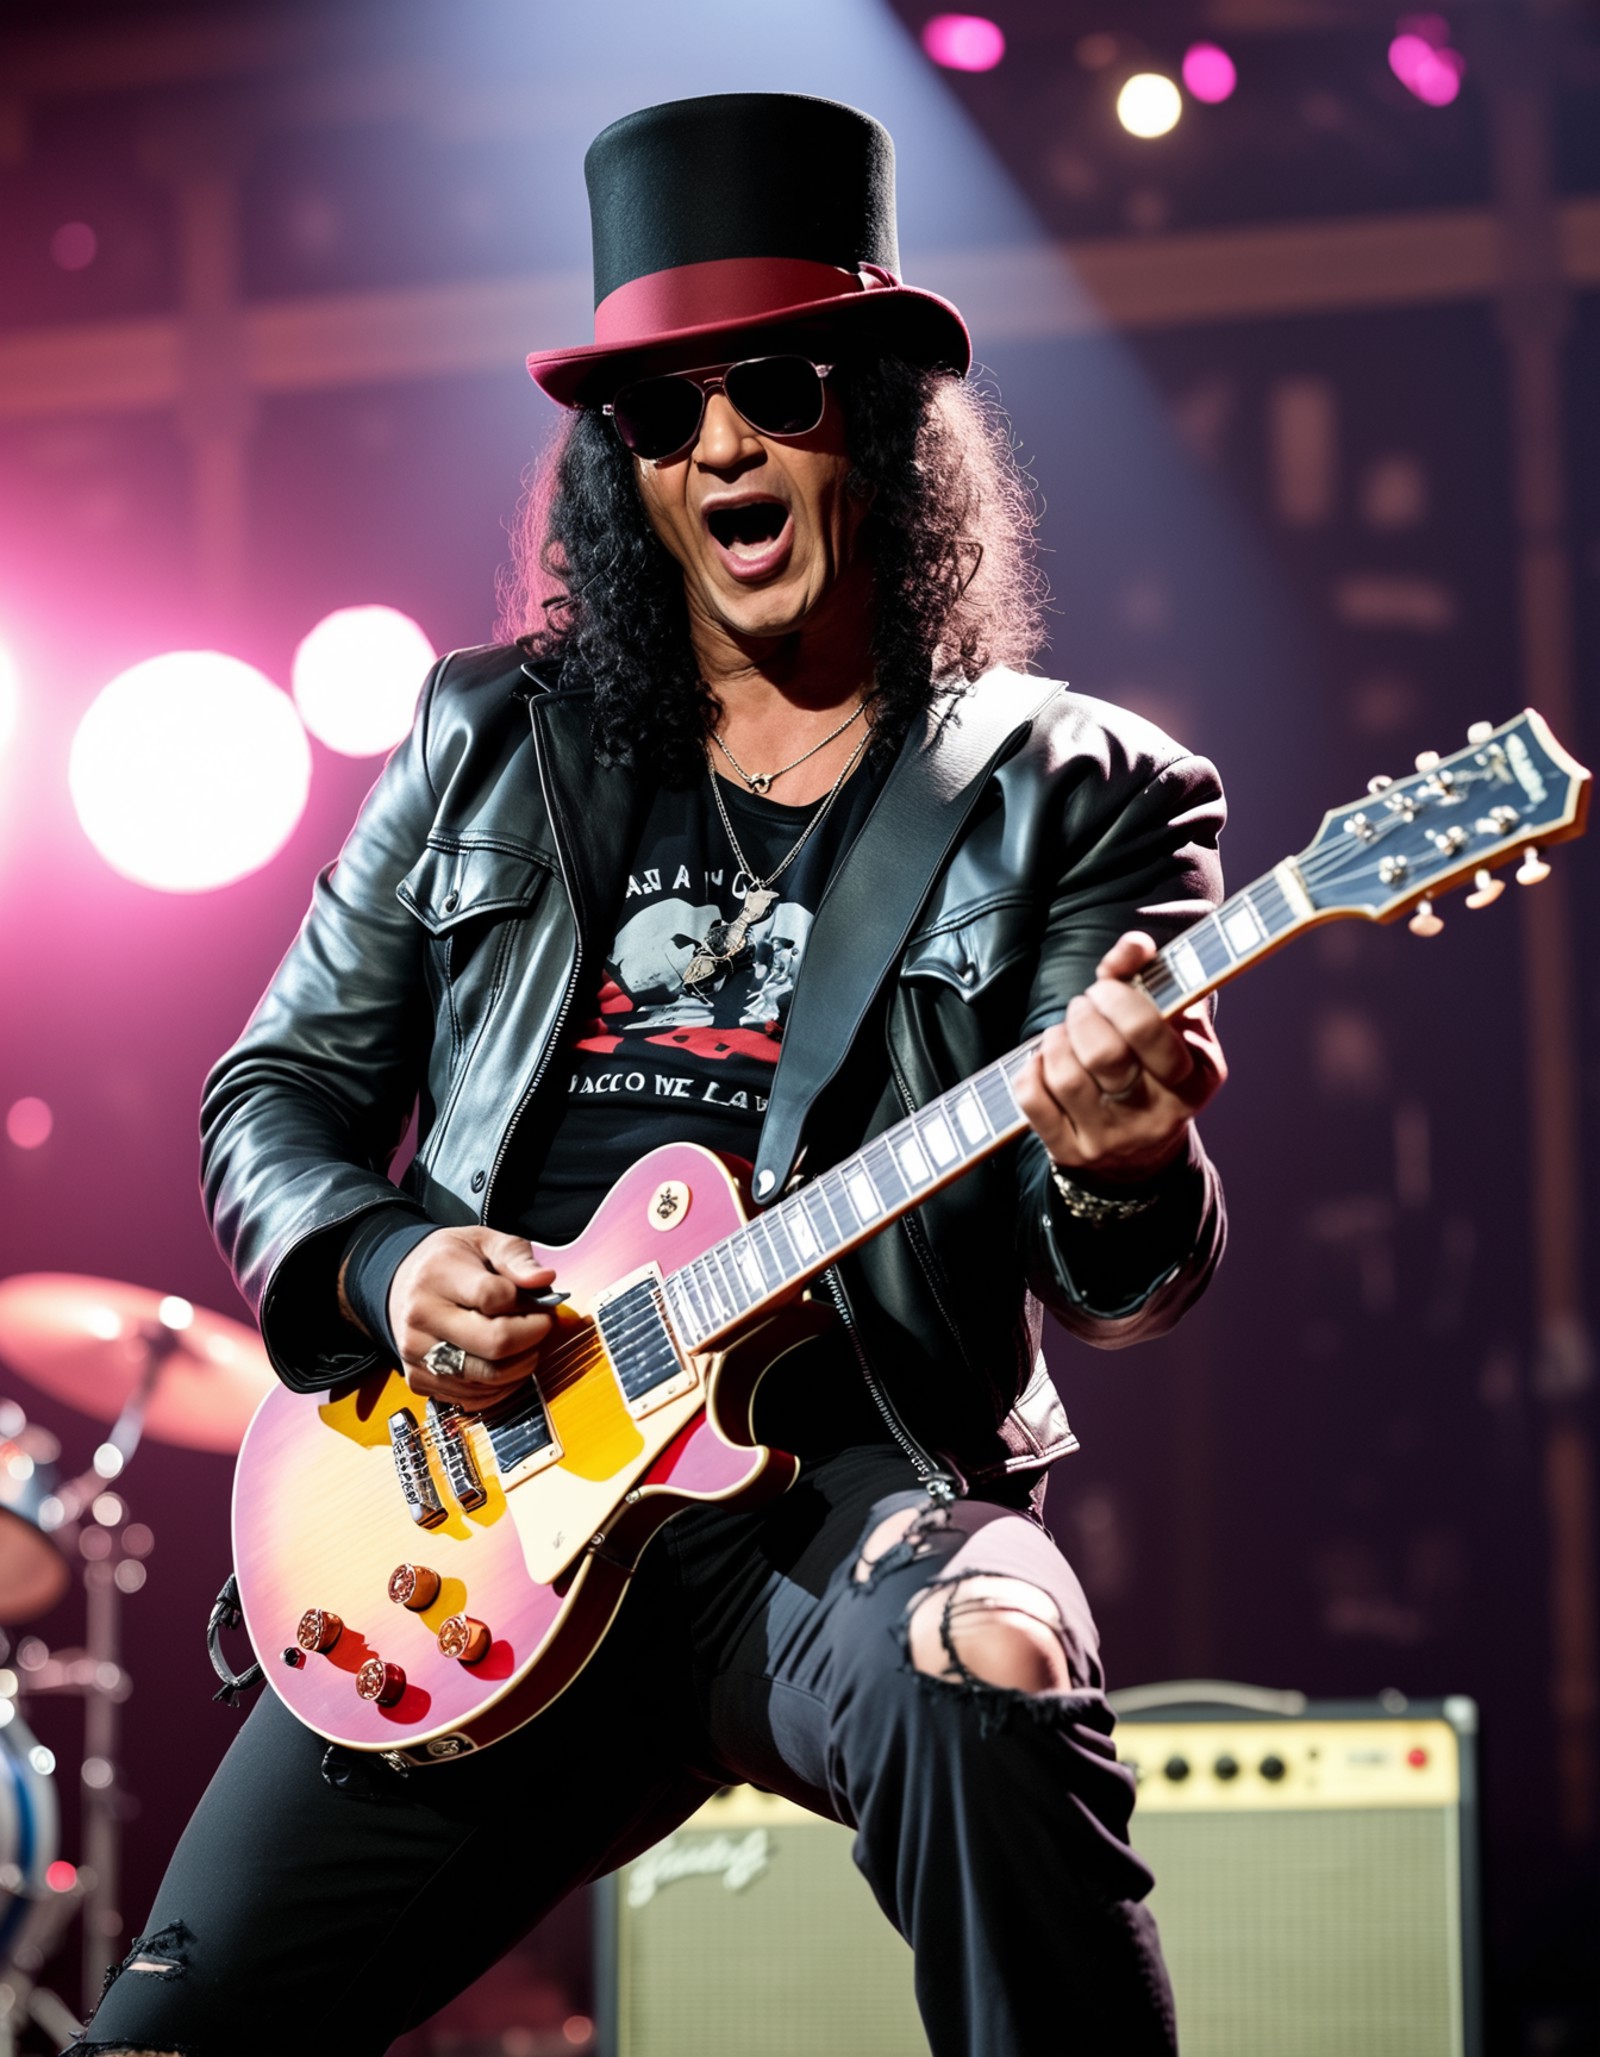 Slash, wearing a black jacket with red and white text, a black tophat, black sunglasses, and a graphic T-shirt, passionate...